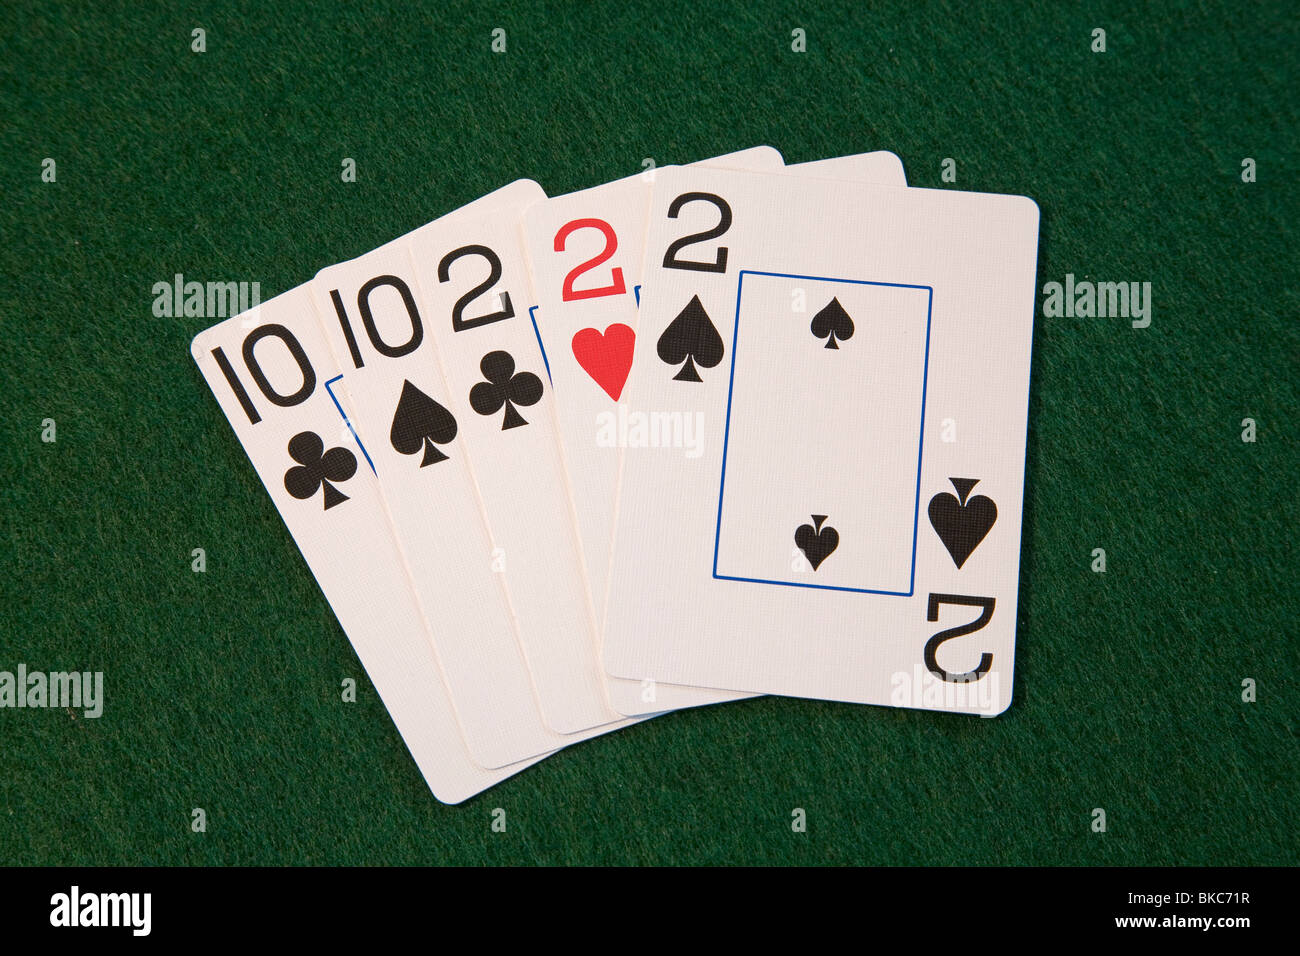 A 'full house' poker hand, deuces and tens, in five card draw or stud poker Stock Photo